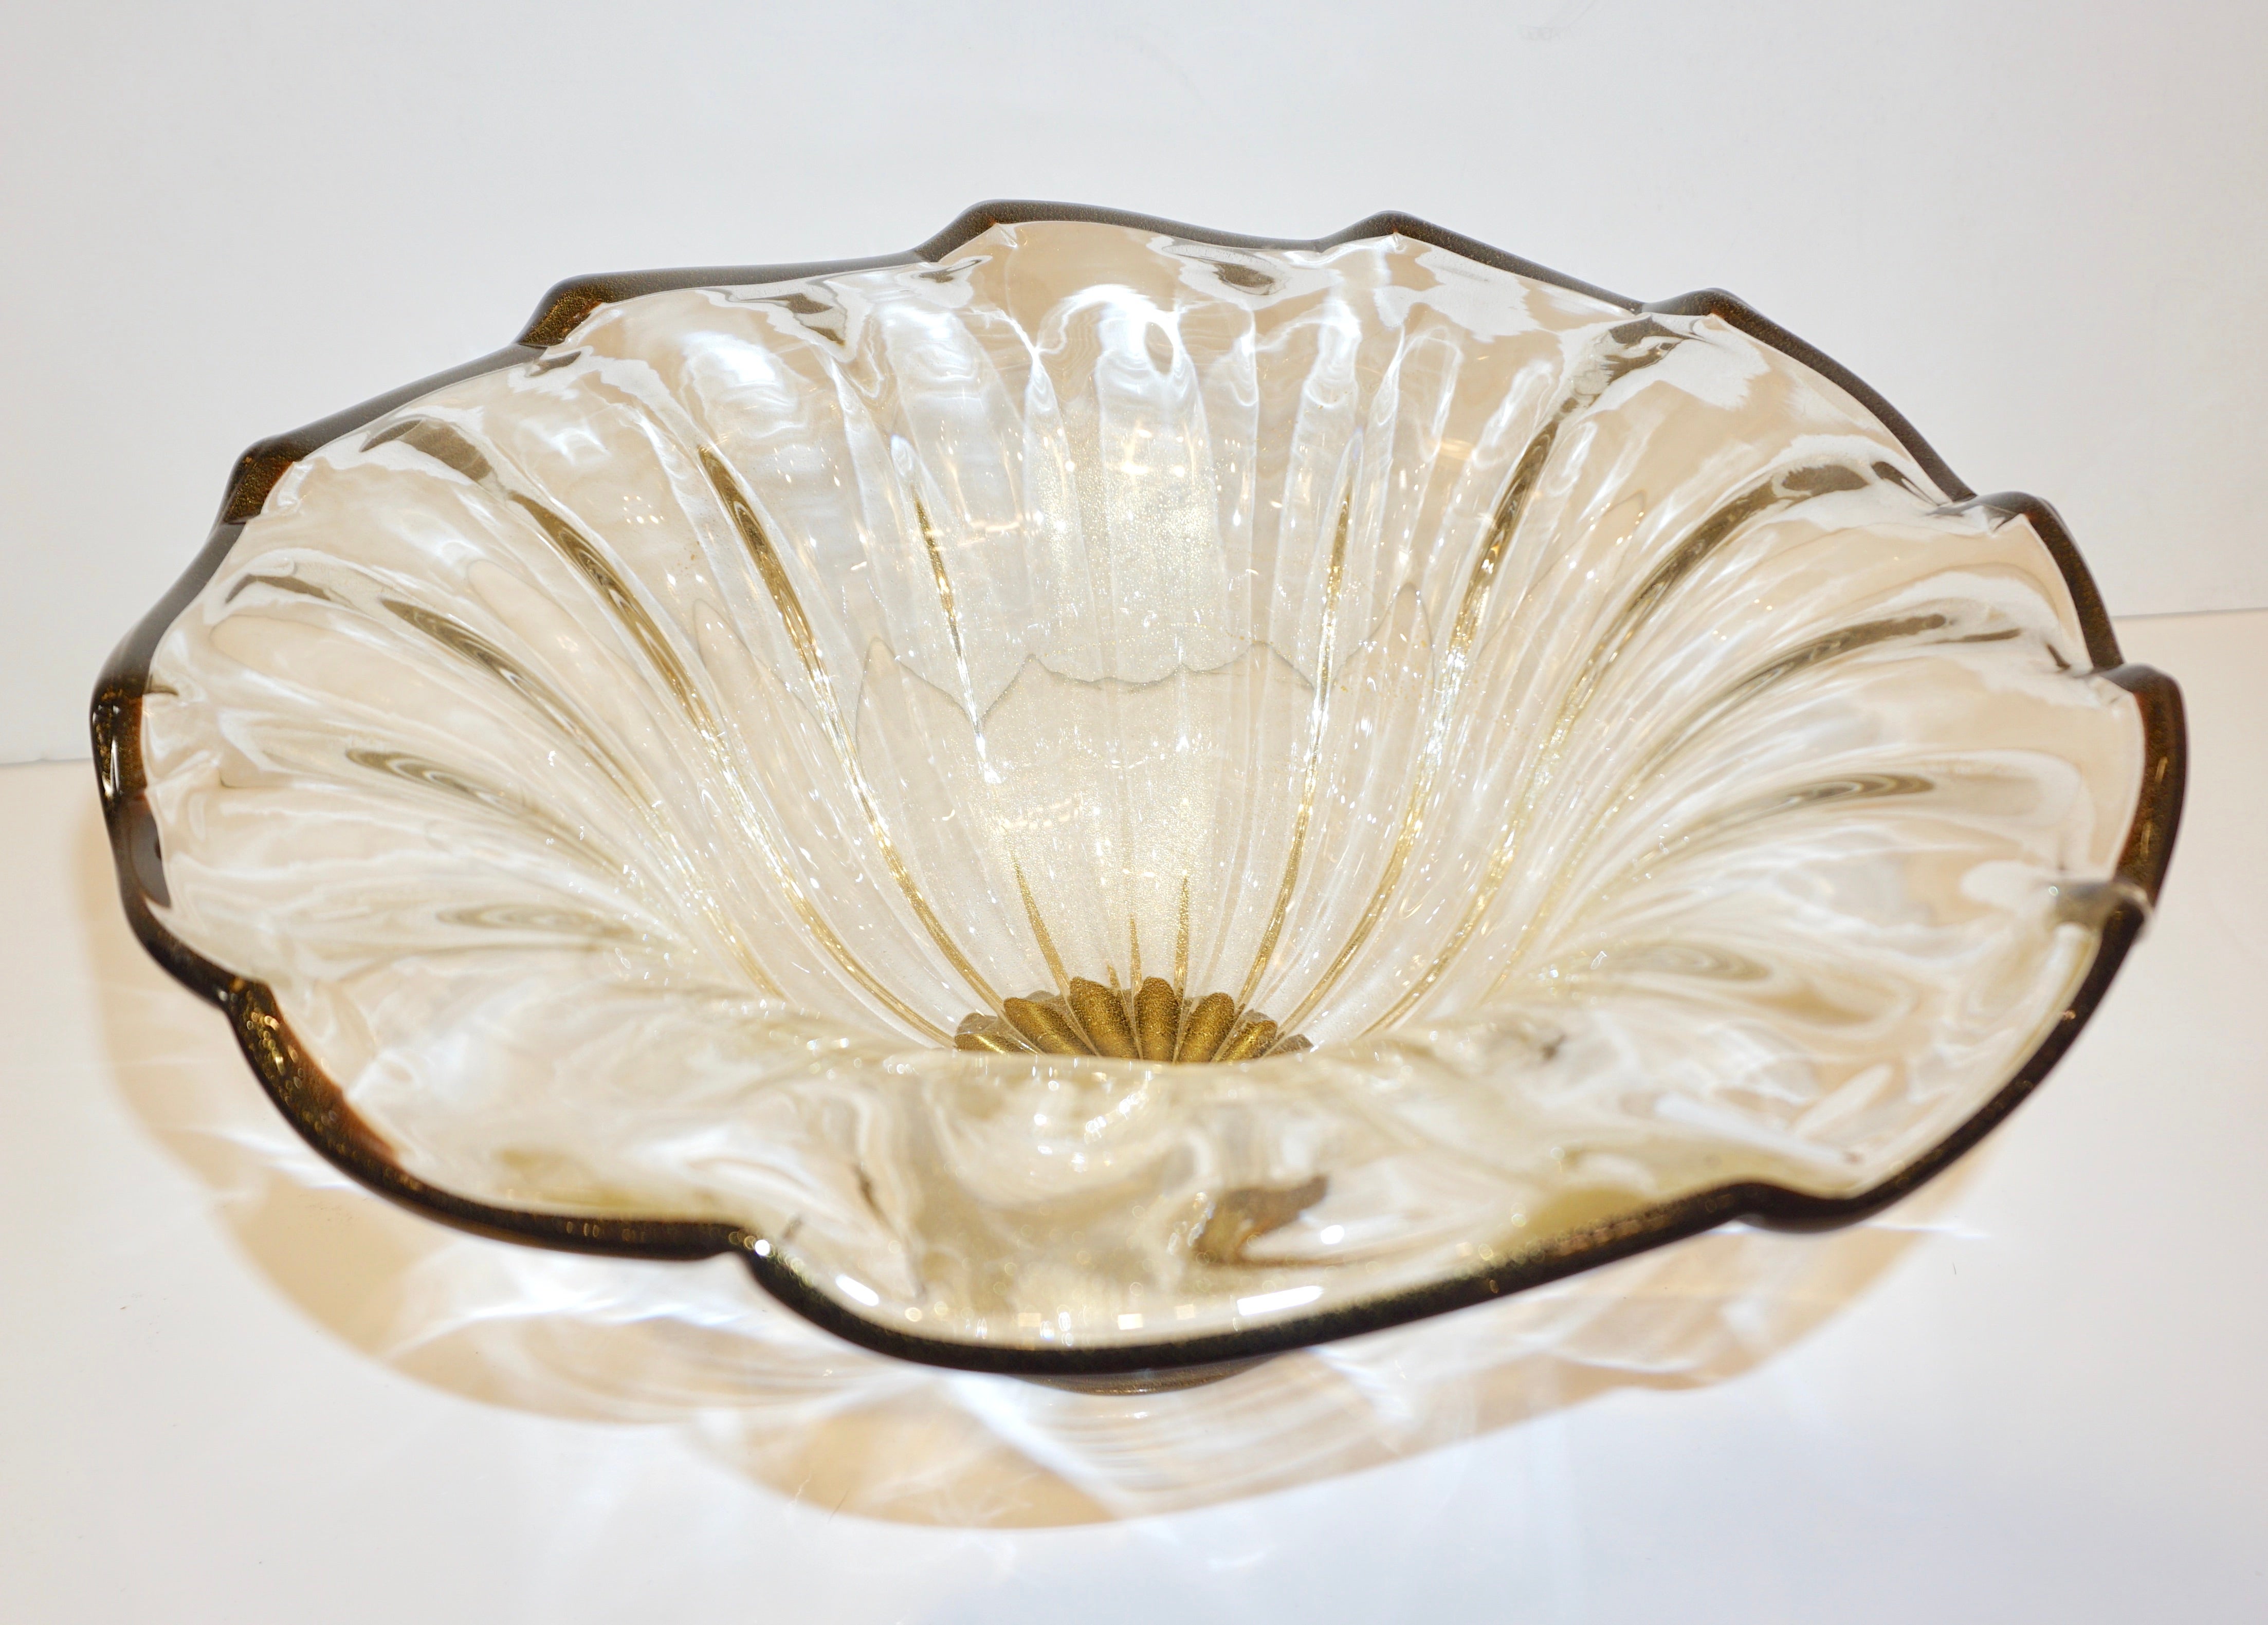 Italian Gold Dust Crystal Murano Glass Scalloped Centerpiece/Bowl with Black Rim For Sale 3